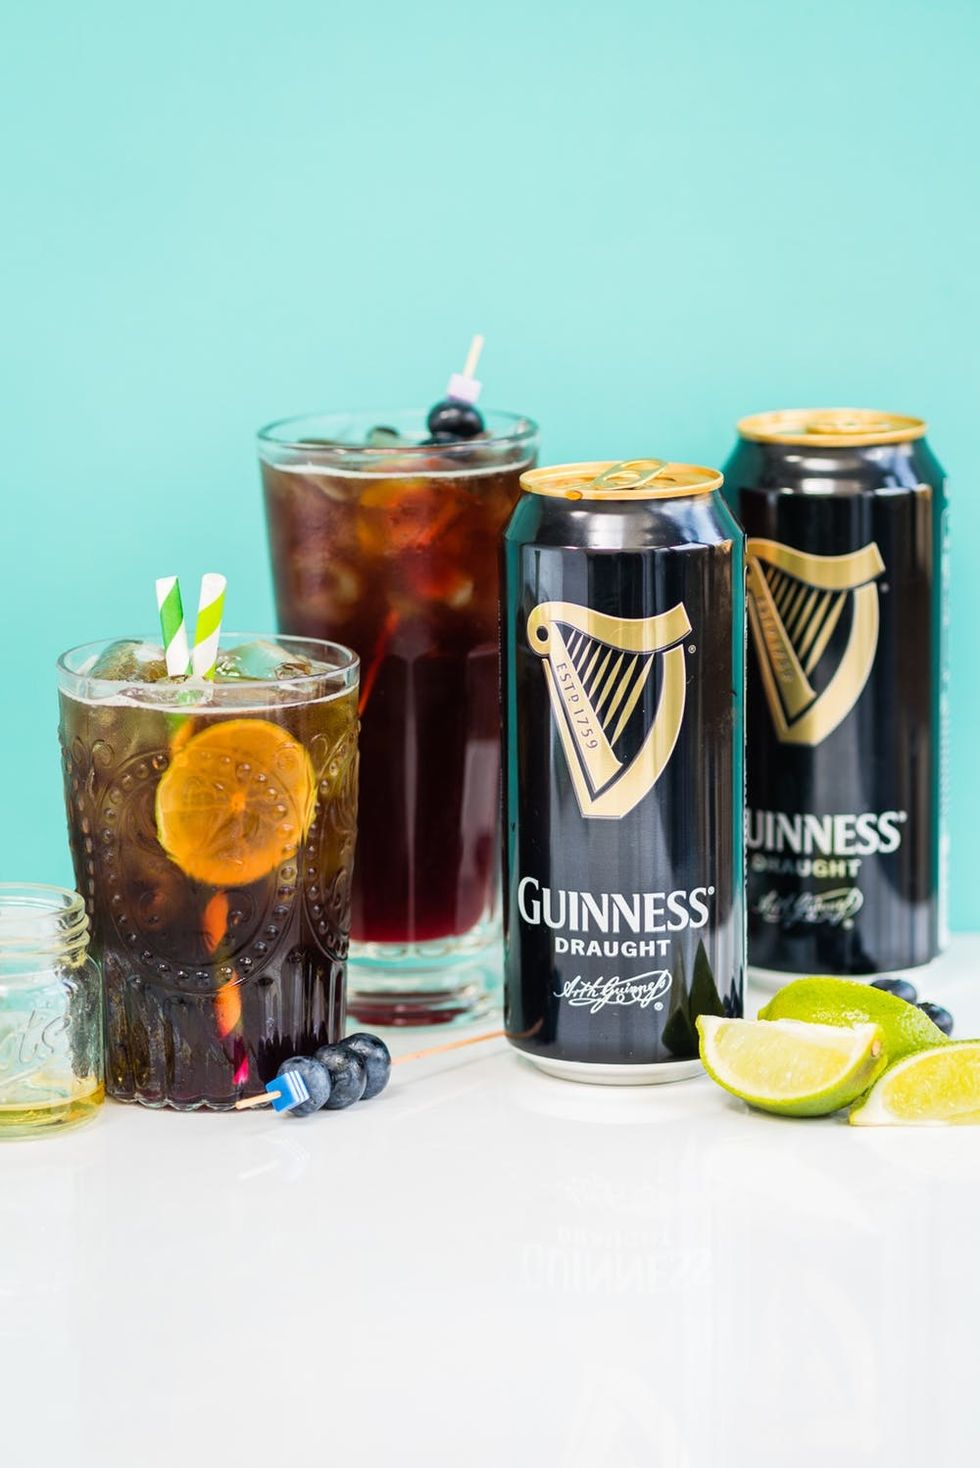 Celebrate St. Patrick's Day with a Guinness Dark and Stormy cocktail